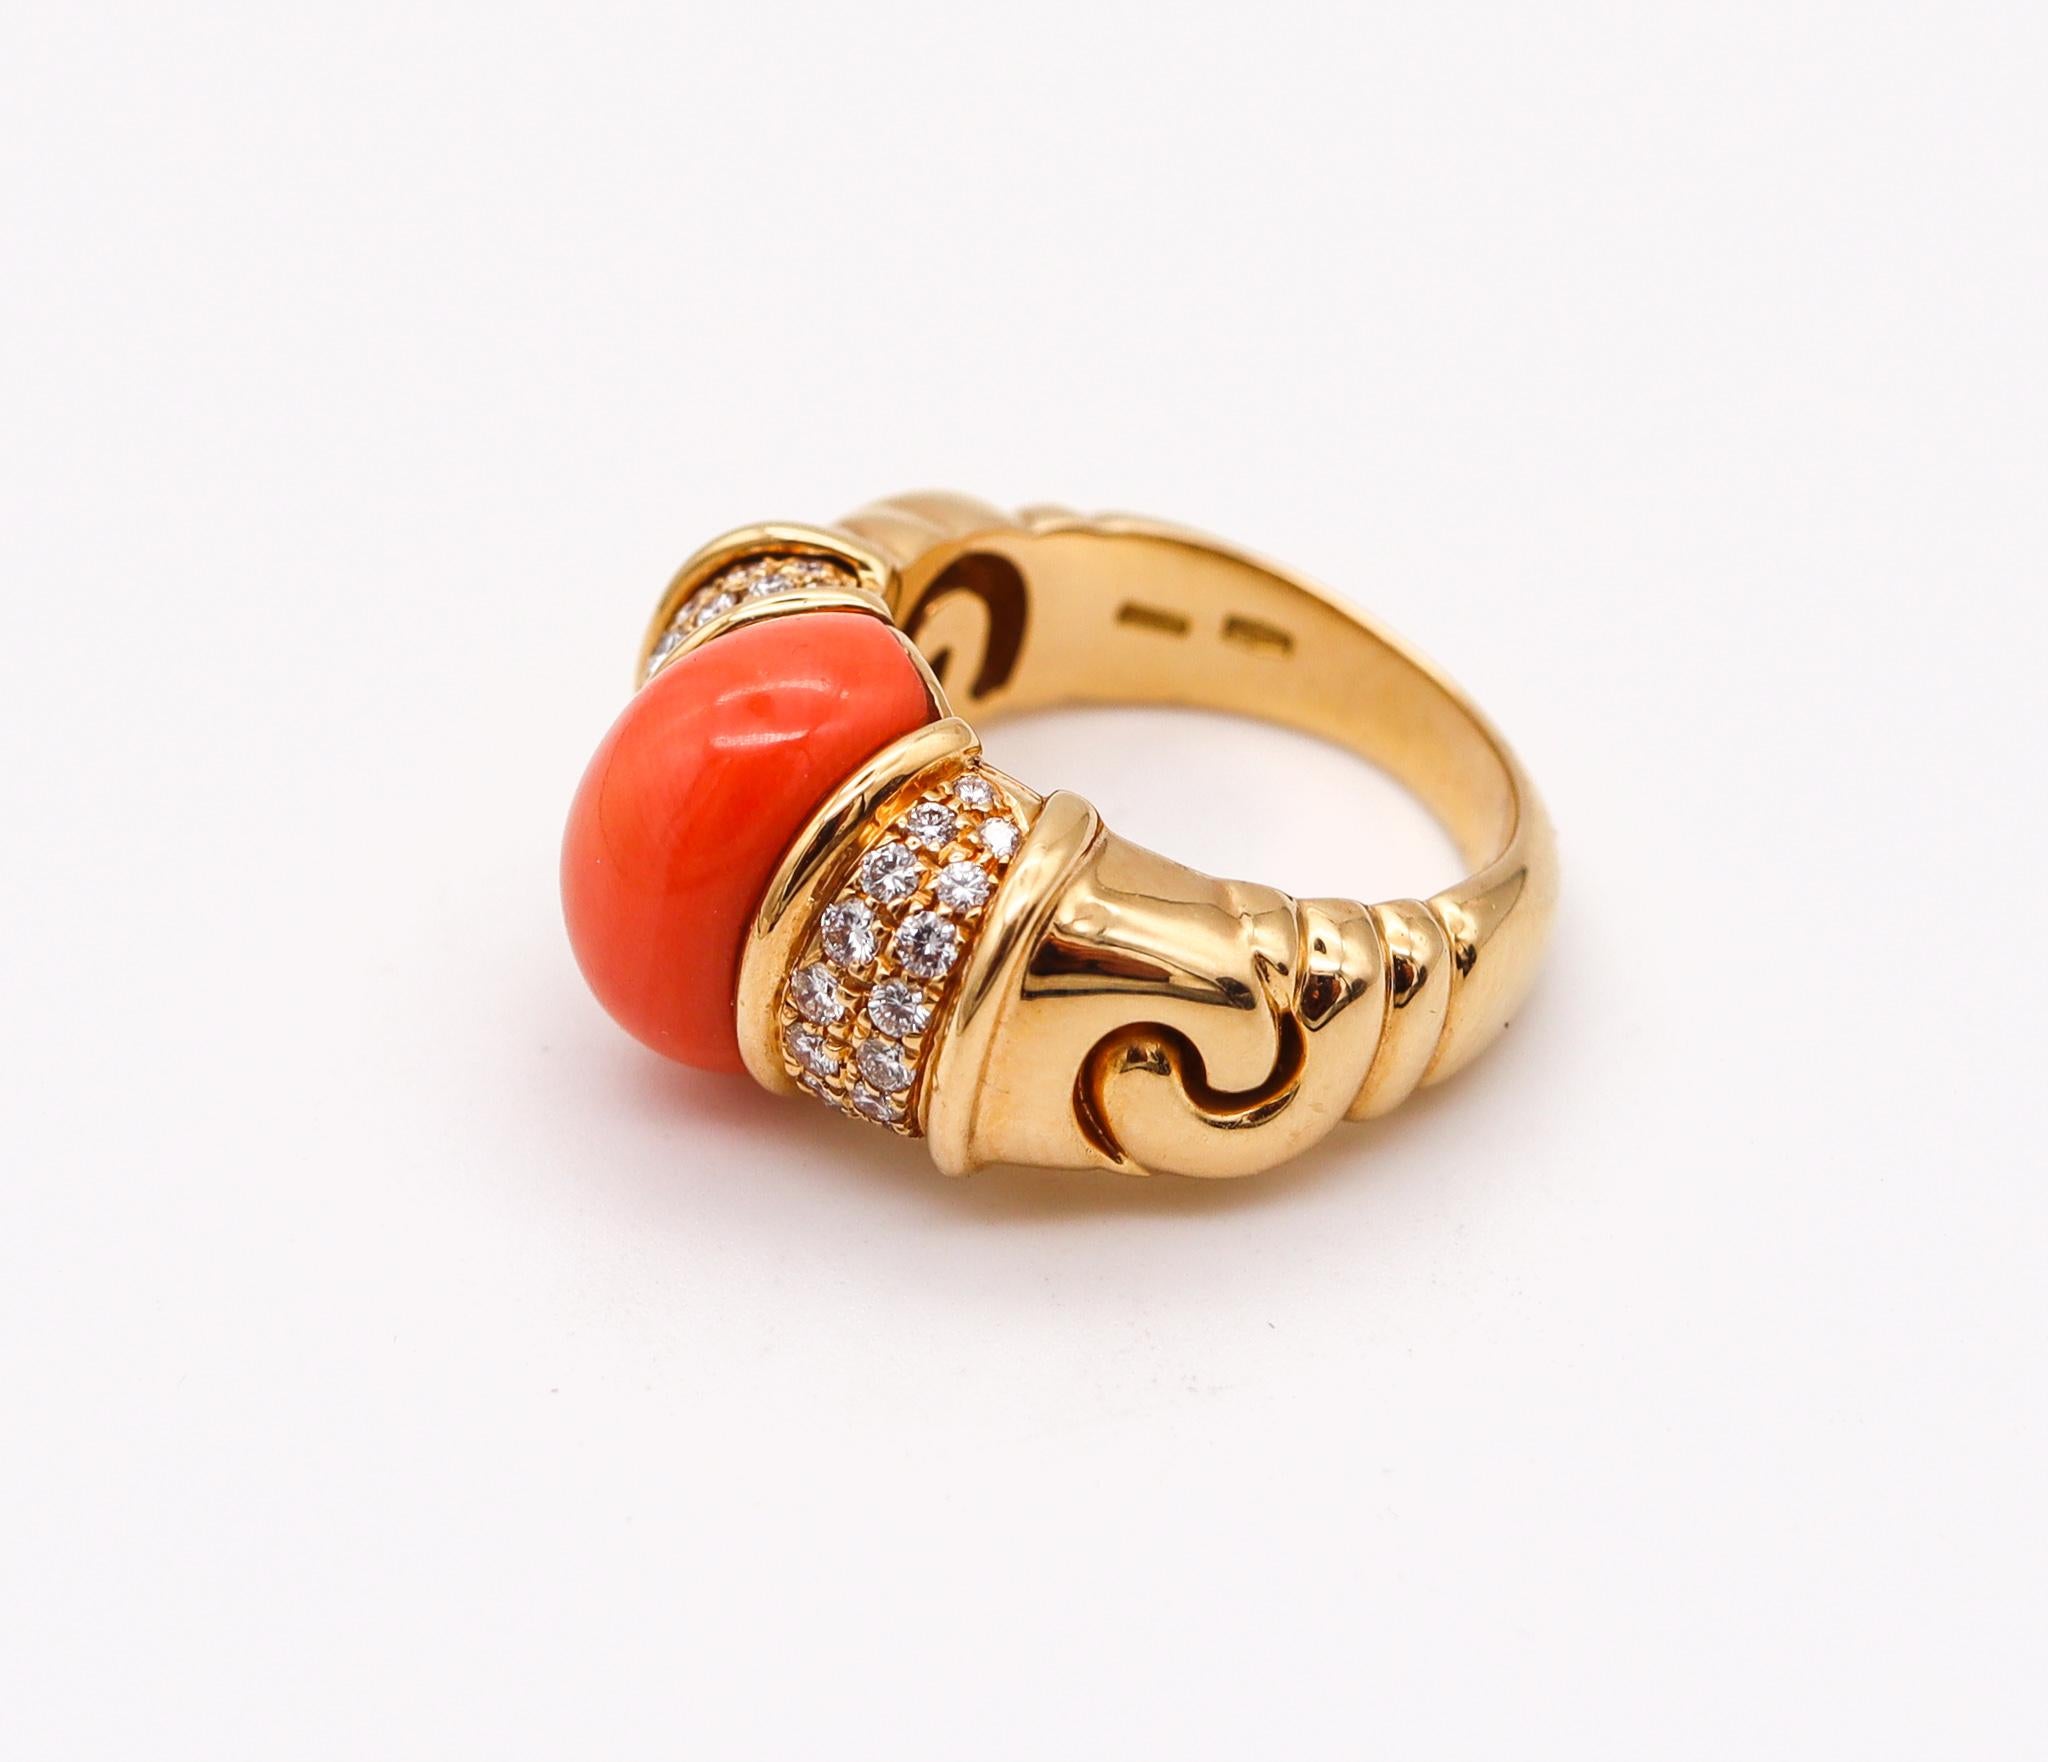 Brilliant Cut Bvlgari Roma Cocktail Ring In 18Kt Gold With 3.68 Ctw Diamonds And Red Coral For Sale